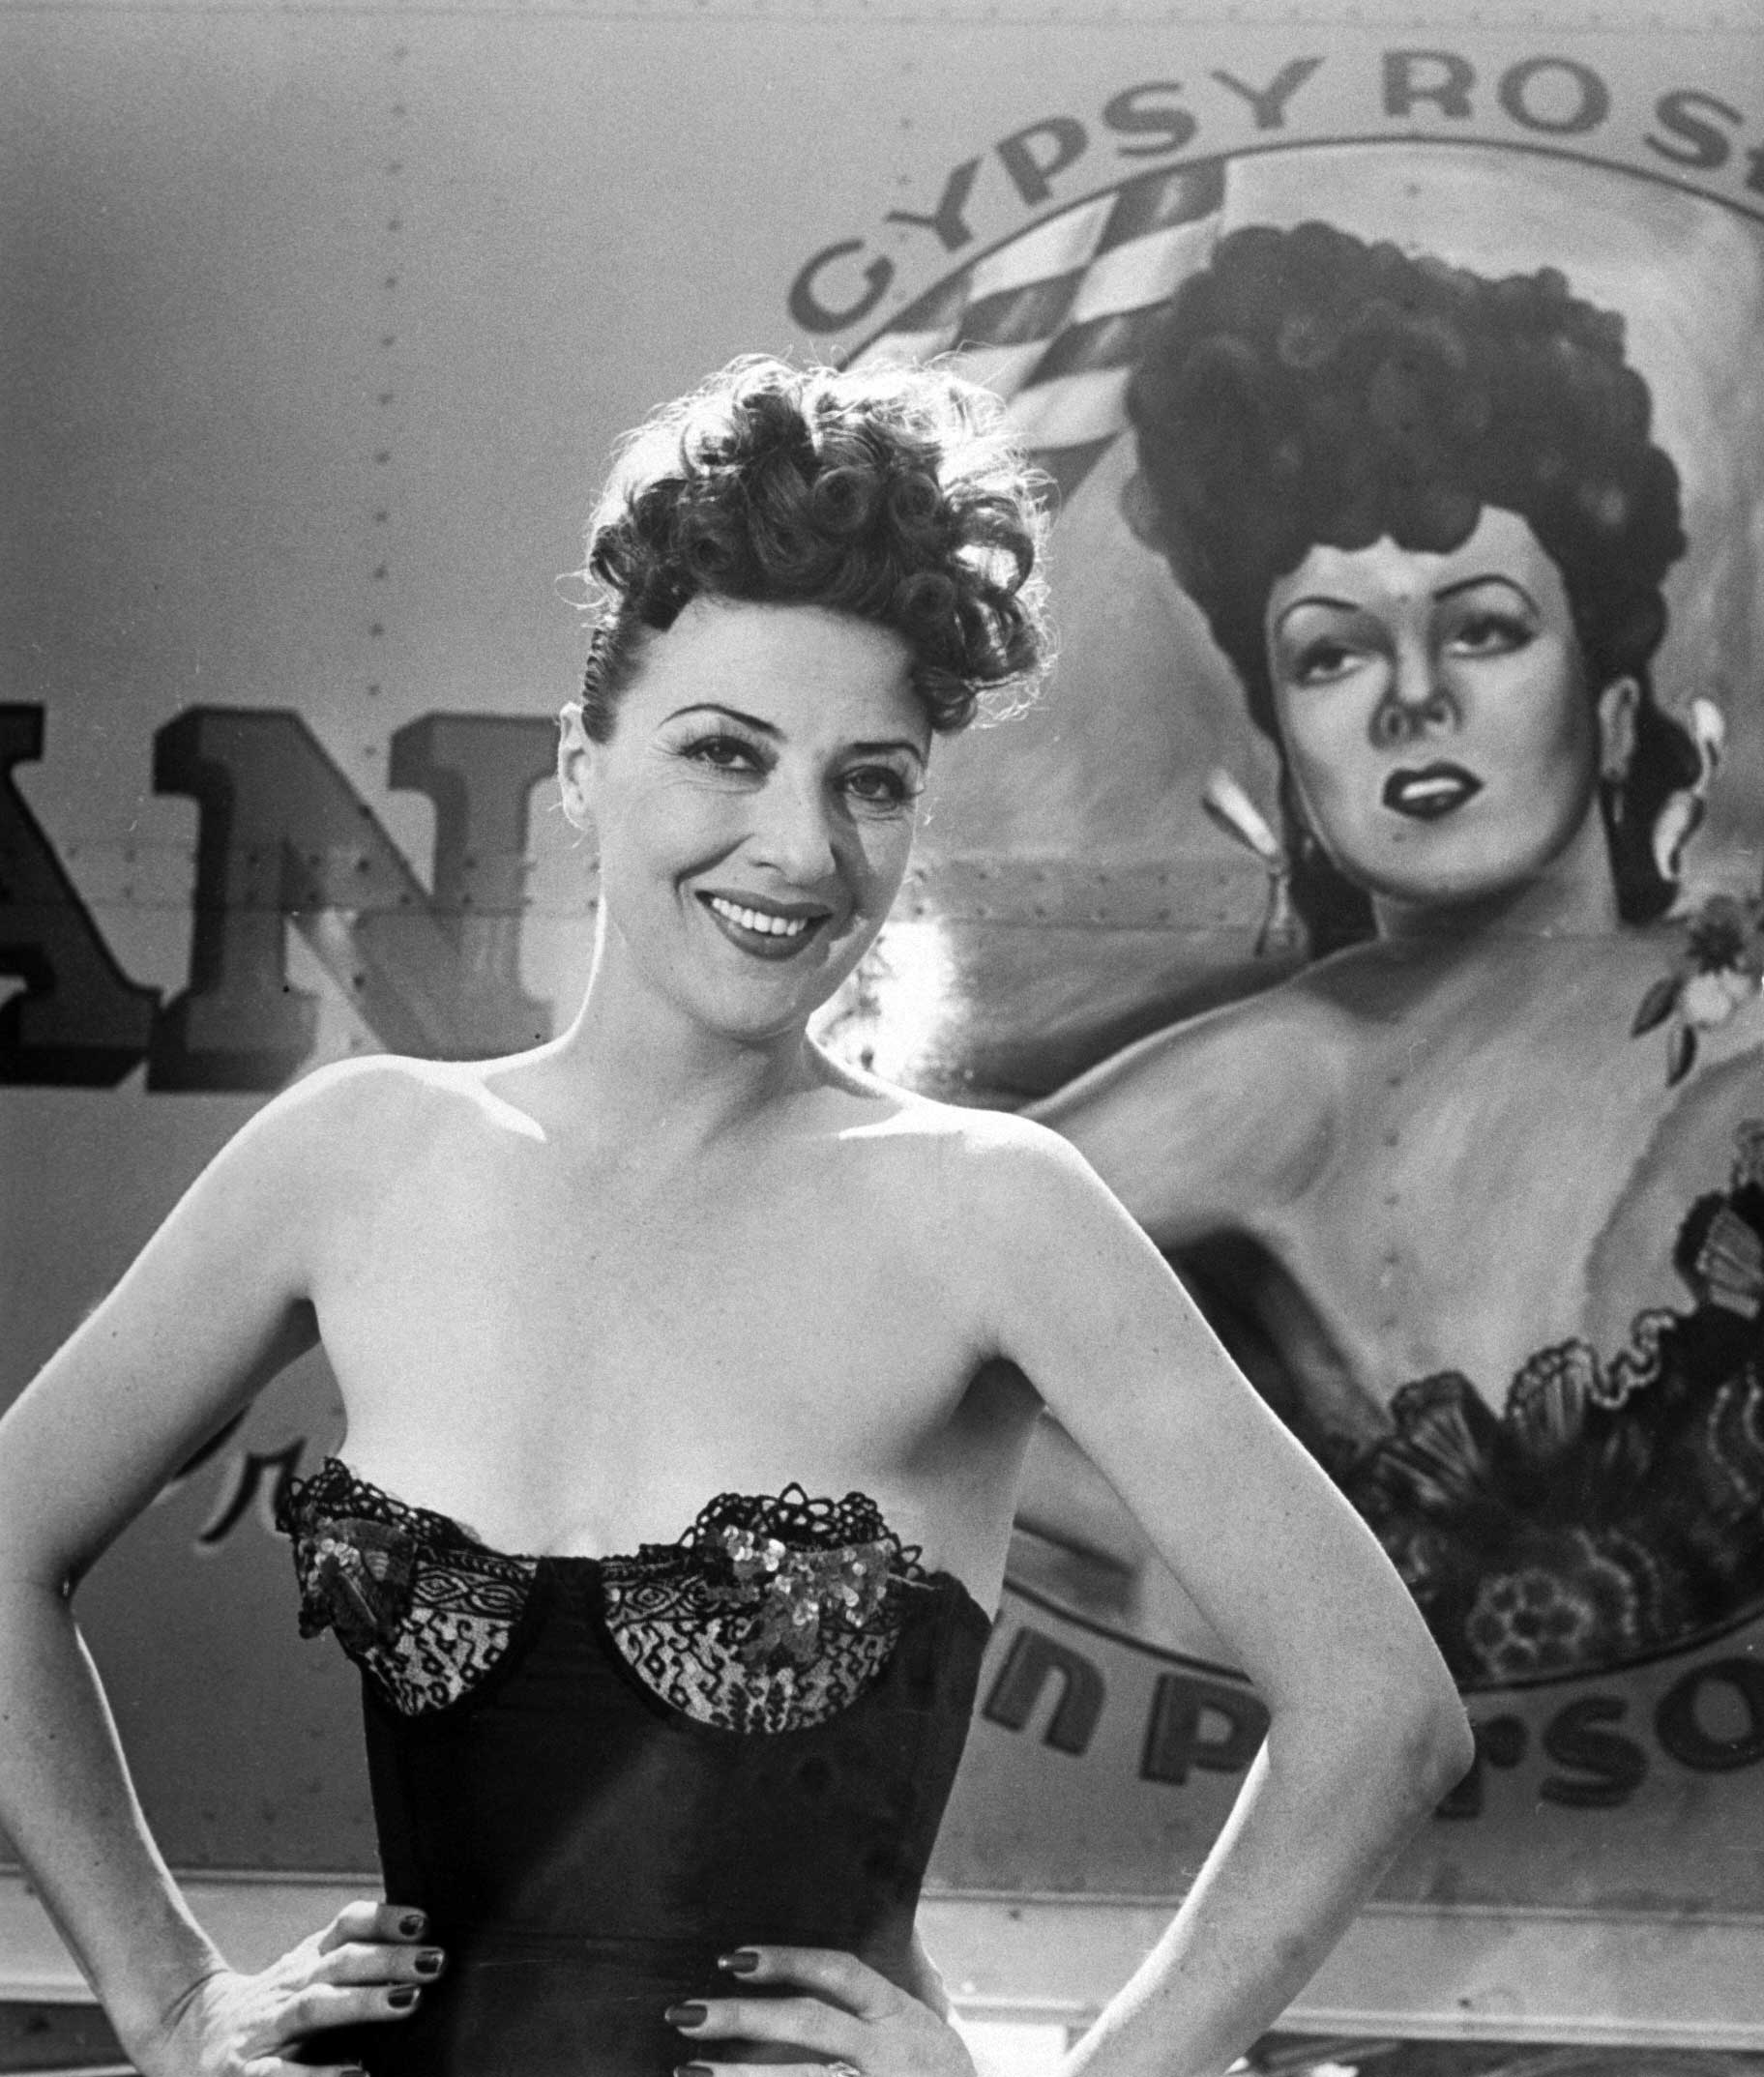 Striptease Superstar: Rare and Classic Photos of Gypsy Rose Lee